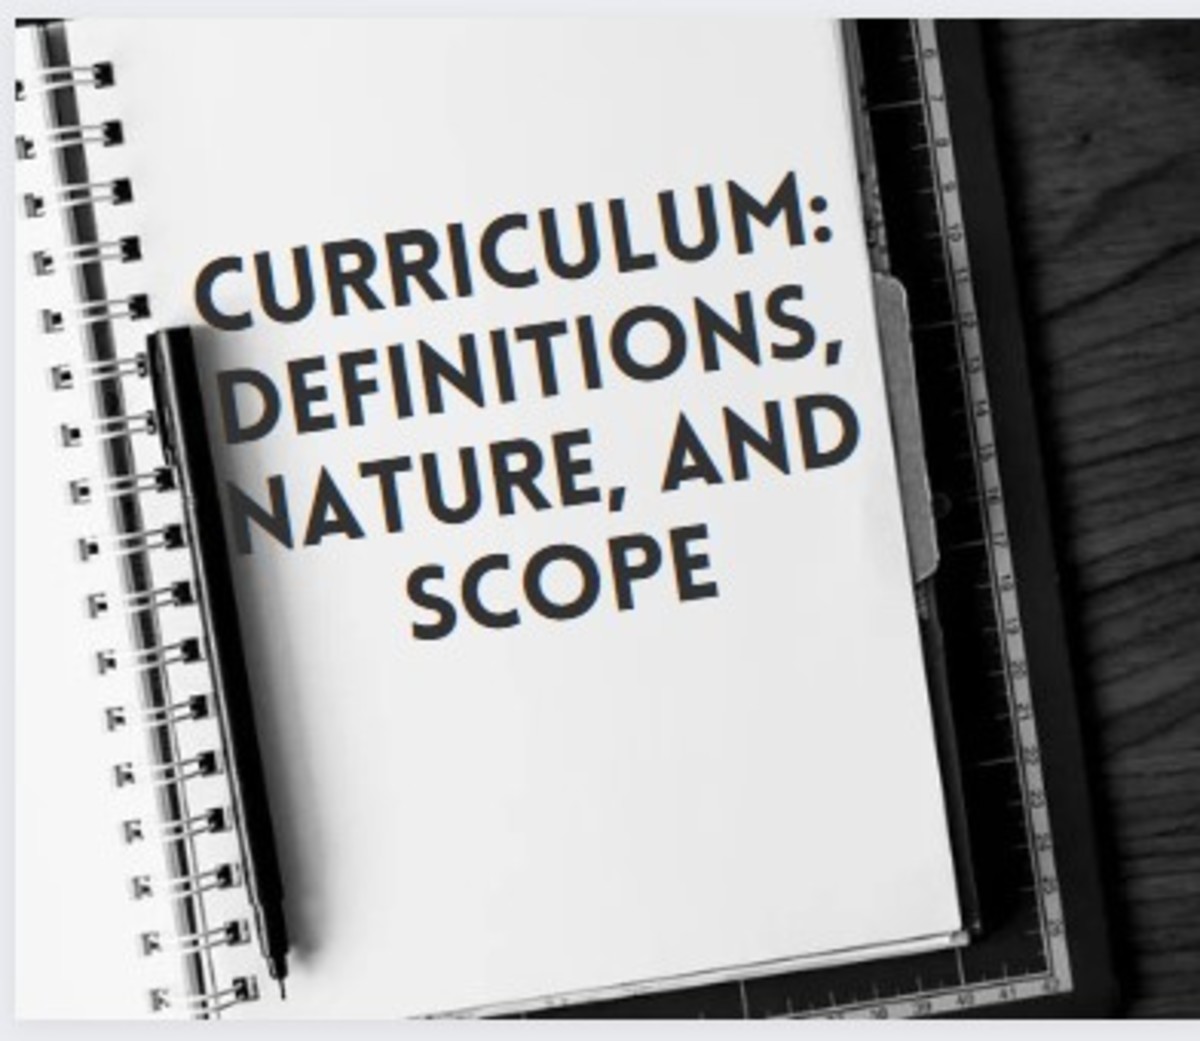 Curriculum: Definitions, Nature, and Scope